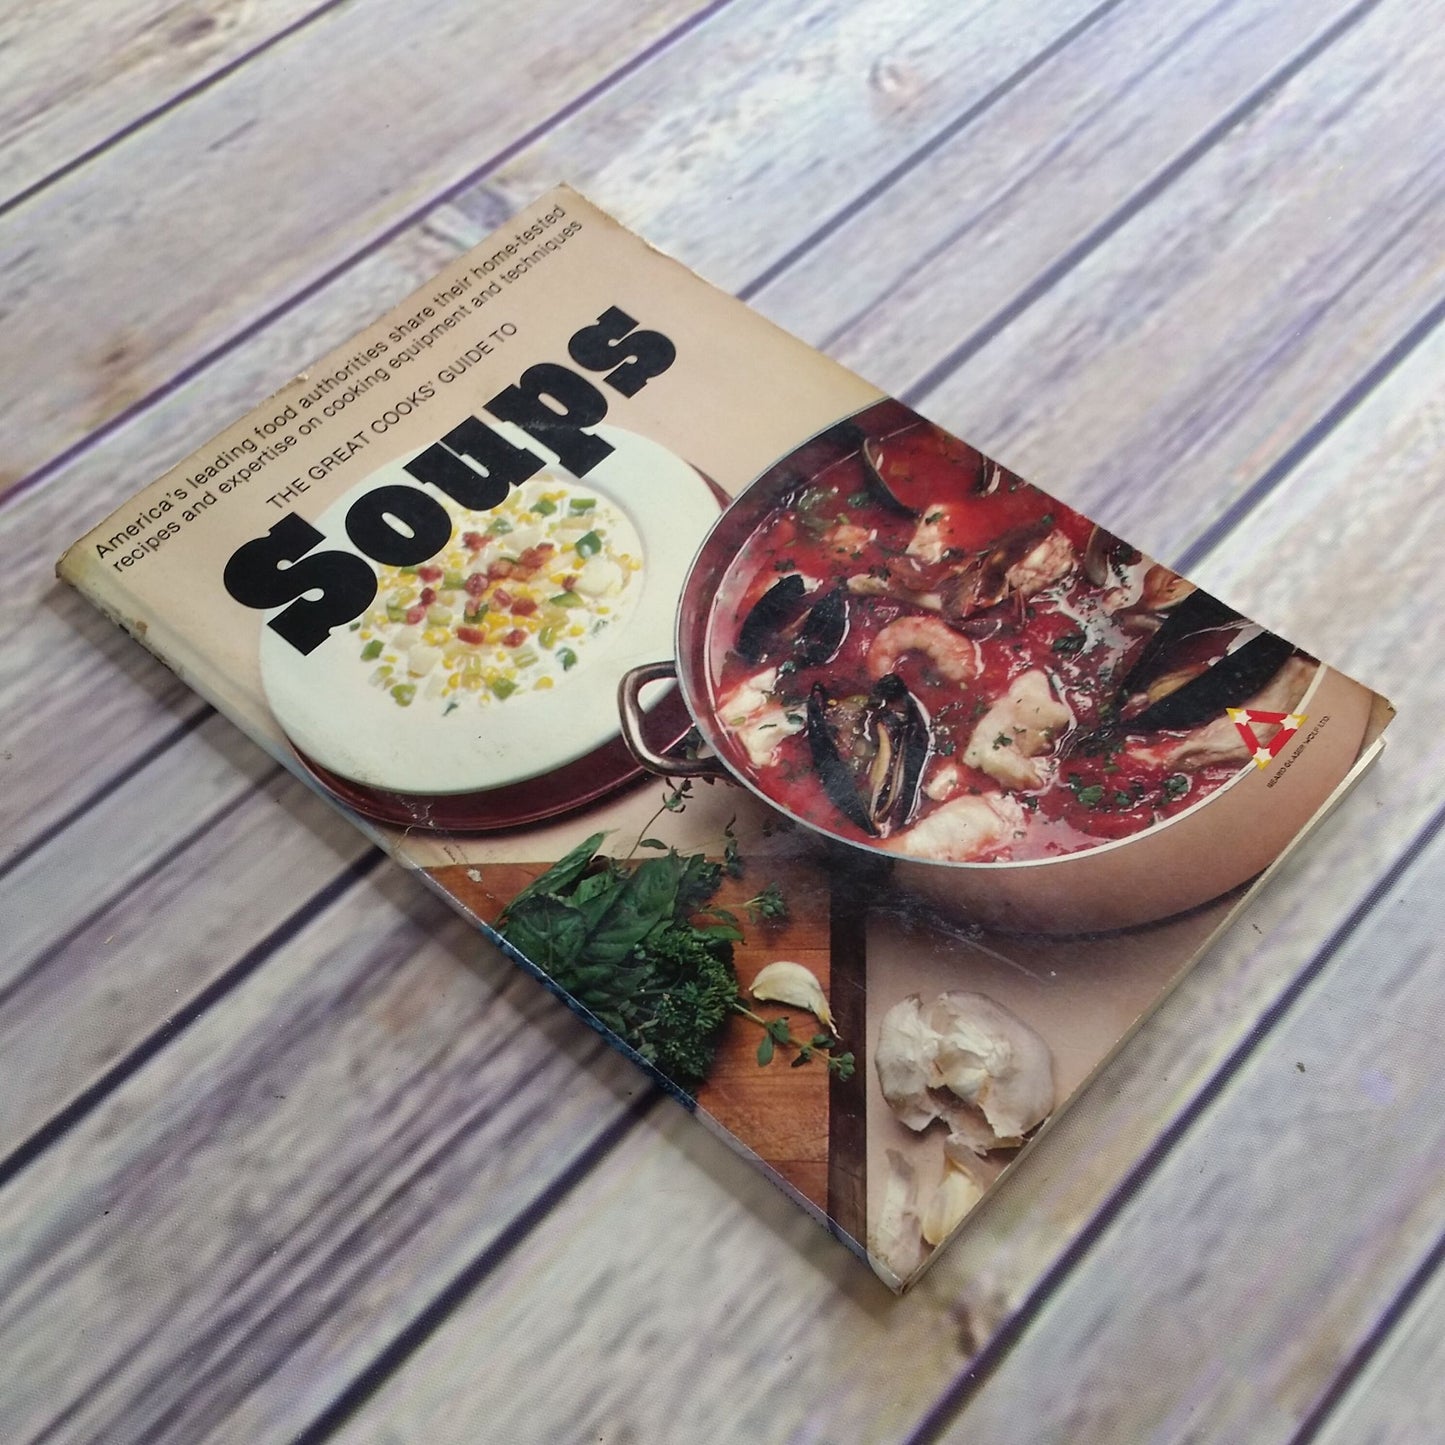 Vintage Soups Cookbook The Great Cooks Guide to Soups Recipes 1977 Paperback First Edition